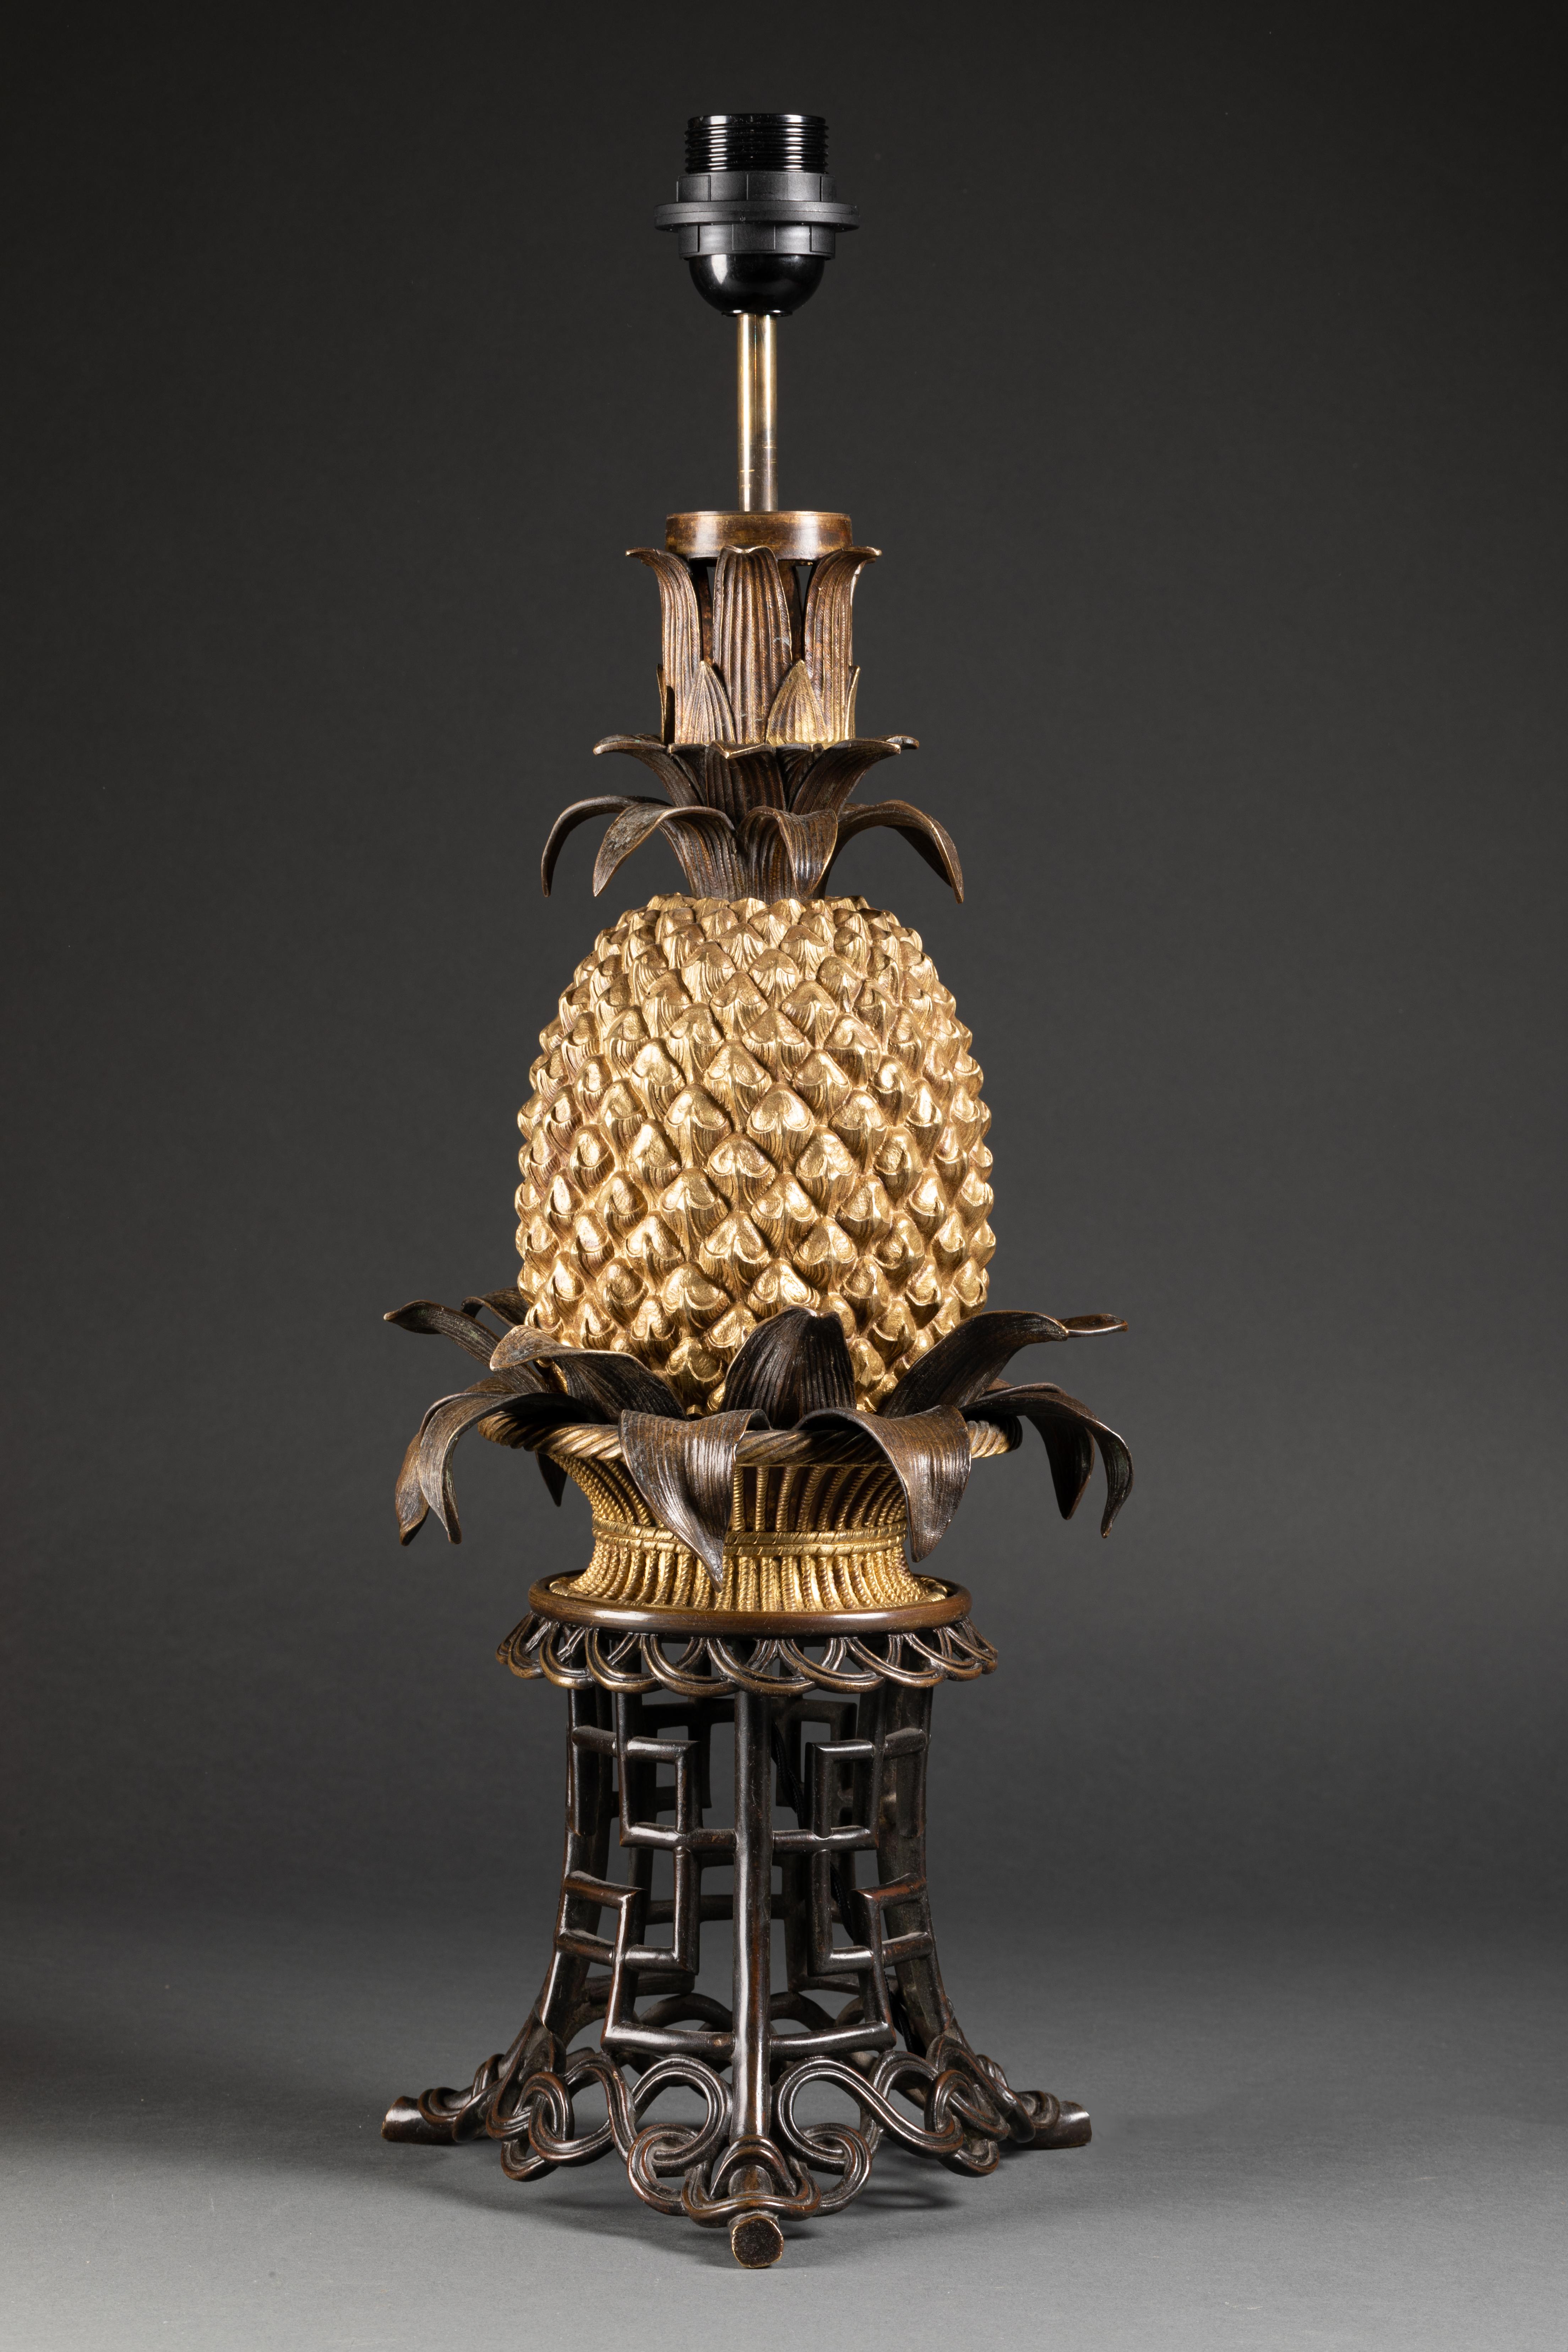 Very rare model of a pineapple lamp on a wicker basket with a chinoiserie base, all bronze. France, circa 1860. Wired to the EU standard. Sold with or without lampshade. Height to socket 57 cm.